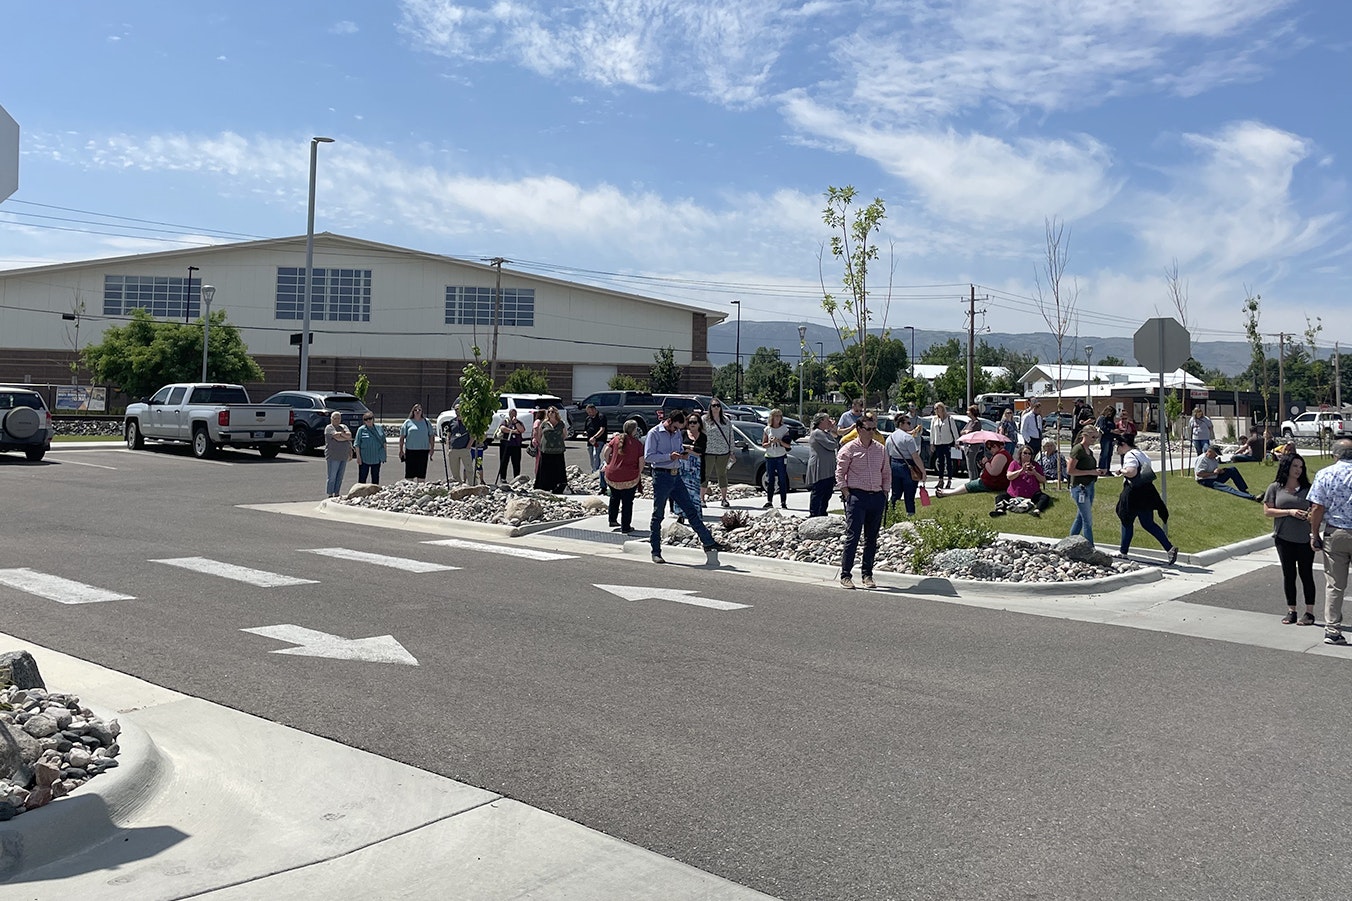 People gather outside the Thyra Thomson State Office Building after a bomb threat prompted an evacuation.